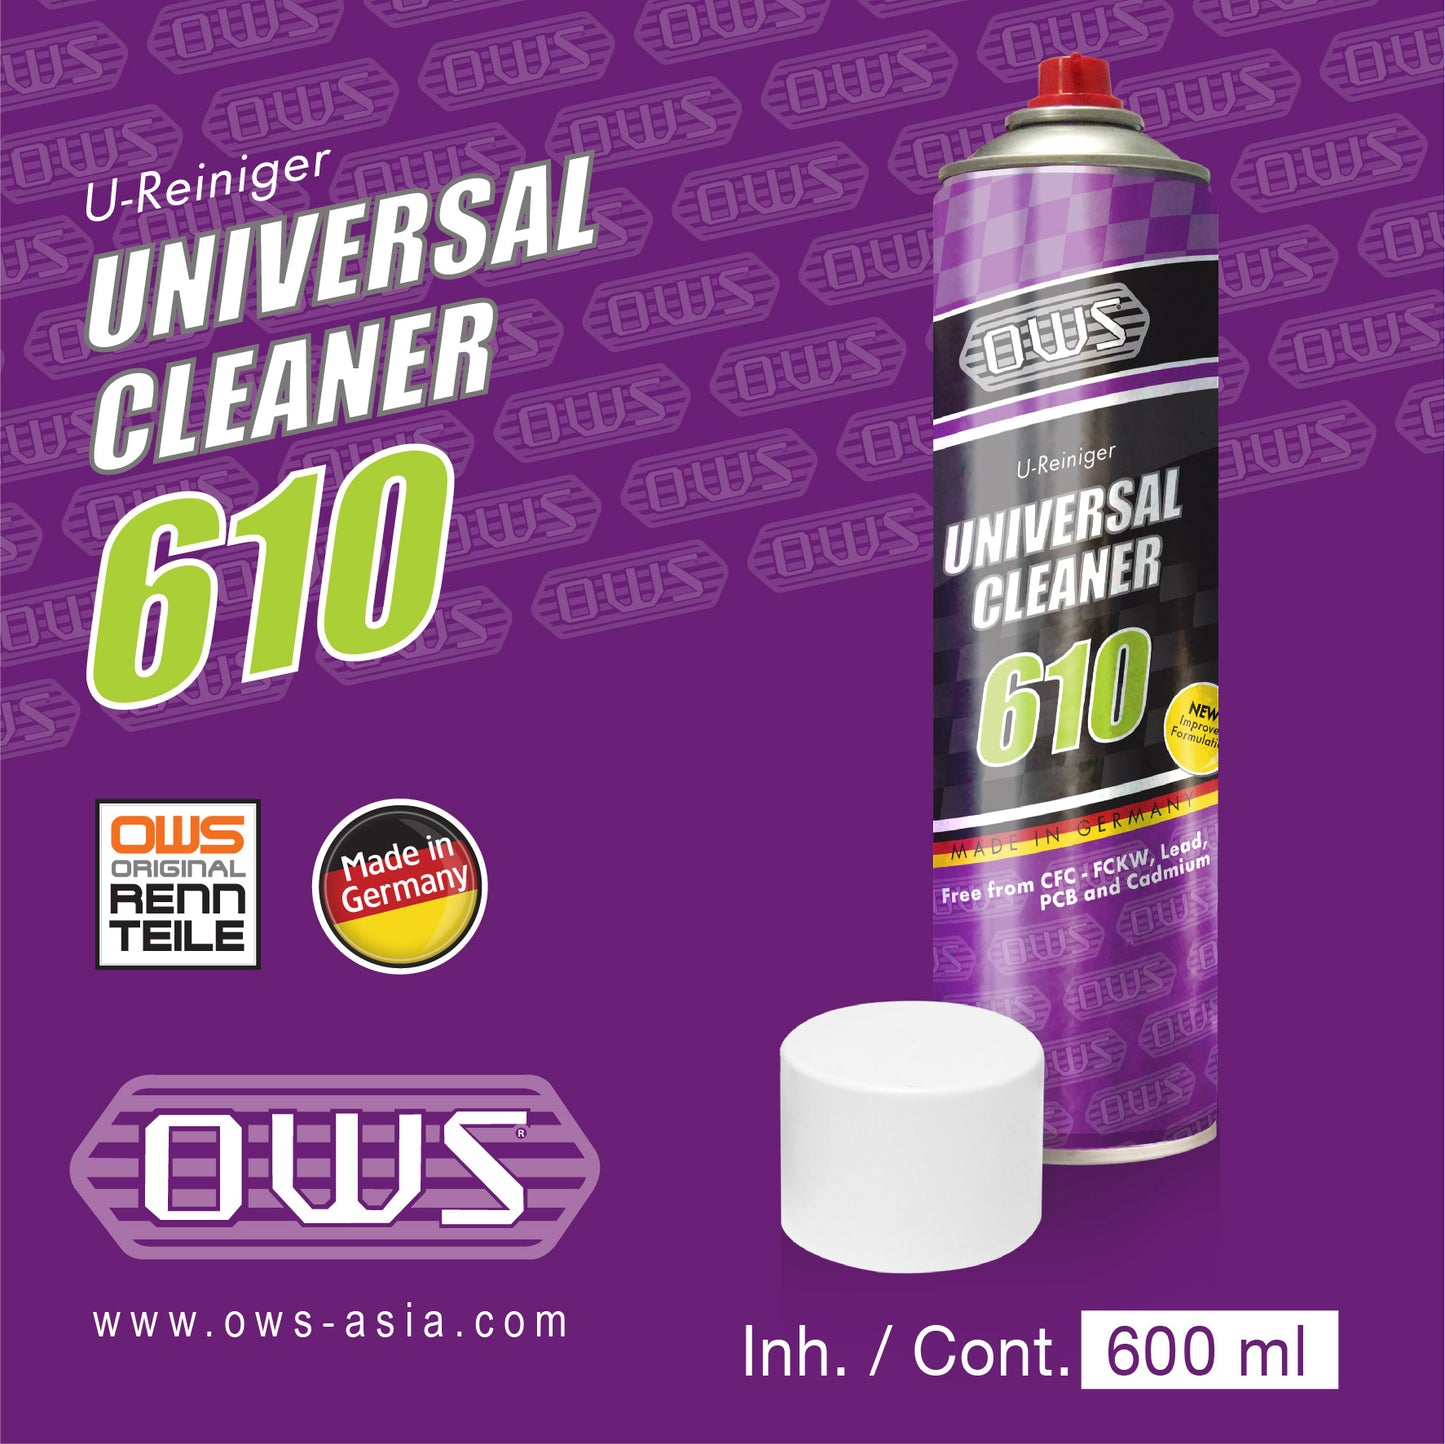 OWS 610 Universal Cleaner